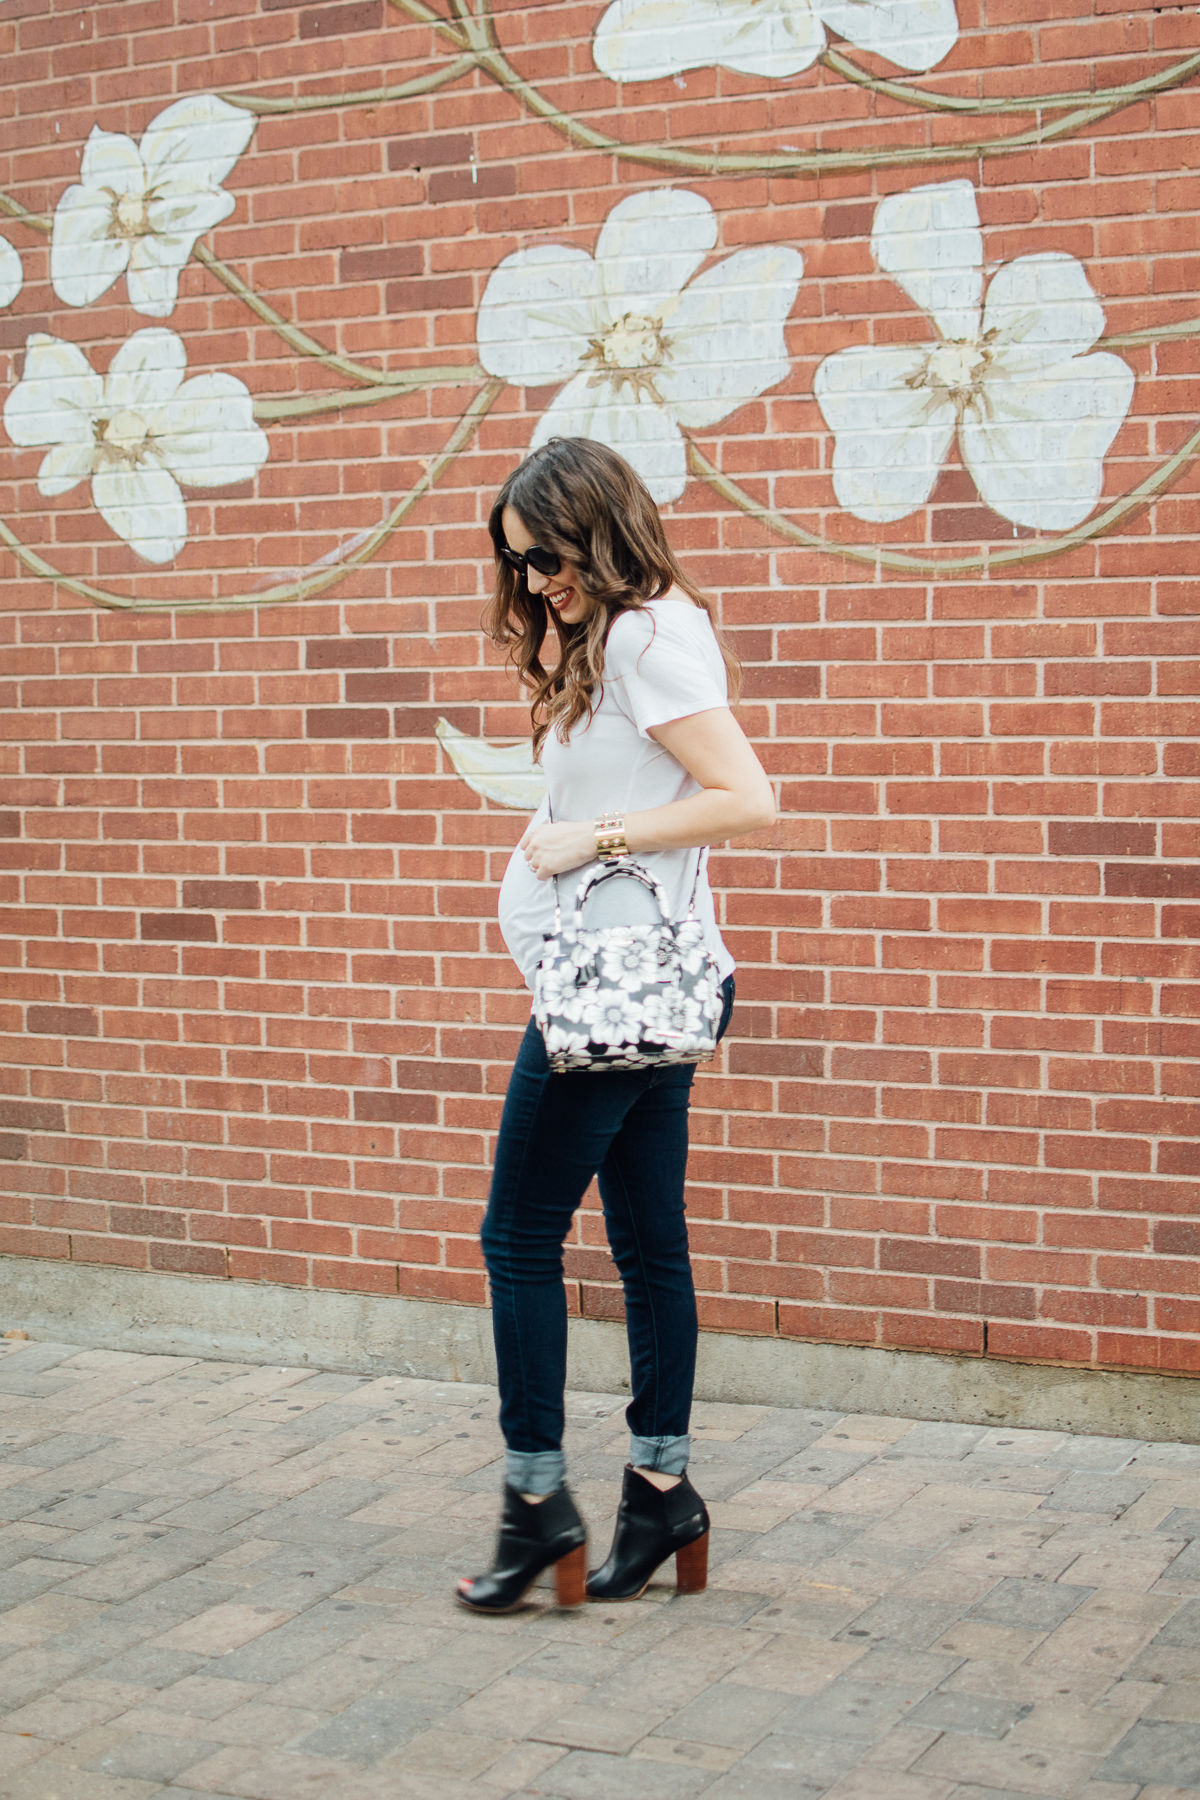 Texas fashion blogger Lone Star Looking Glass shares maternity outfit inspiration in a white tee, jeans and a Kate Spade Floral Handbag.